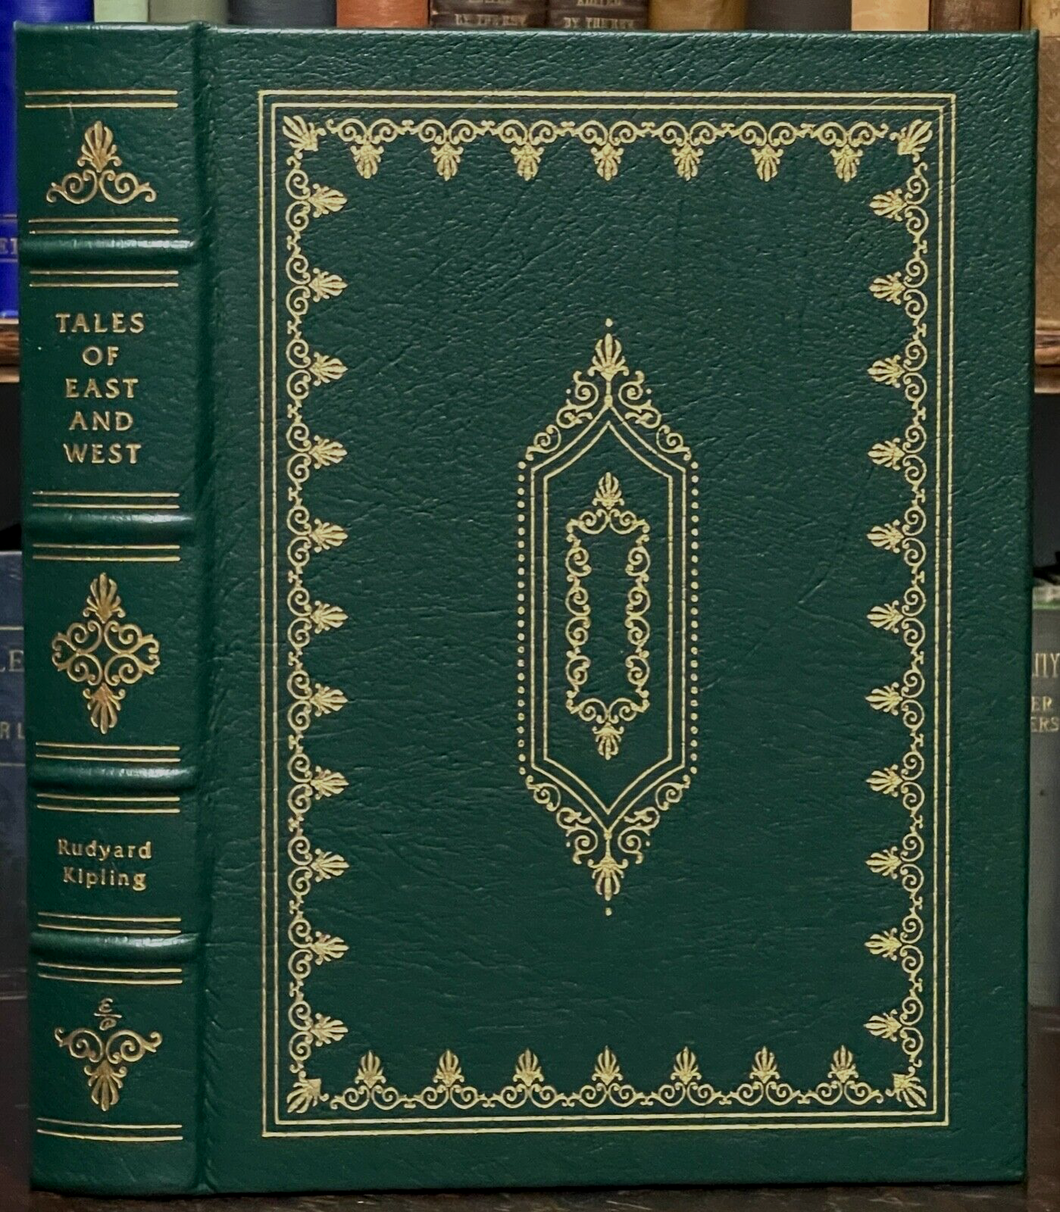 TALES OF EAST AND WEST - Easton Press, Full Leather - 1st, 1973 RUDYARD KIPLING